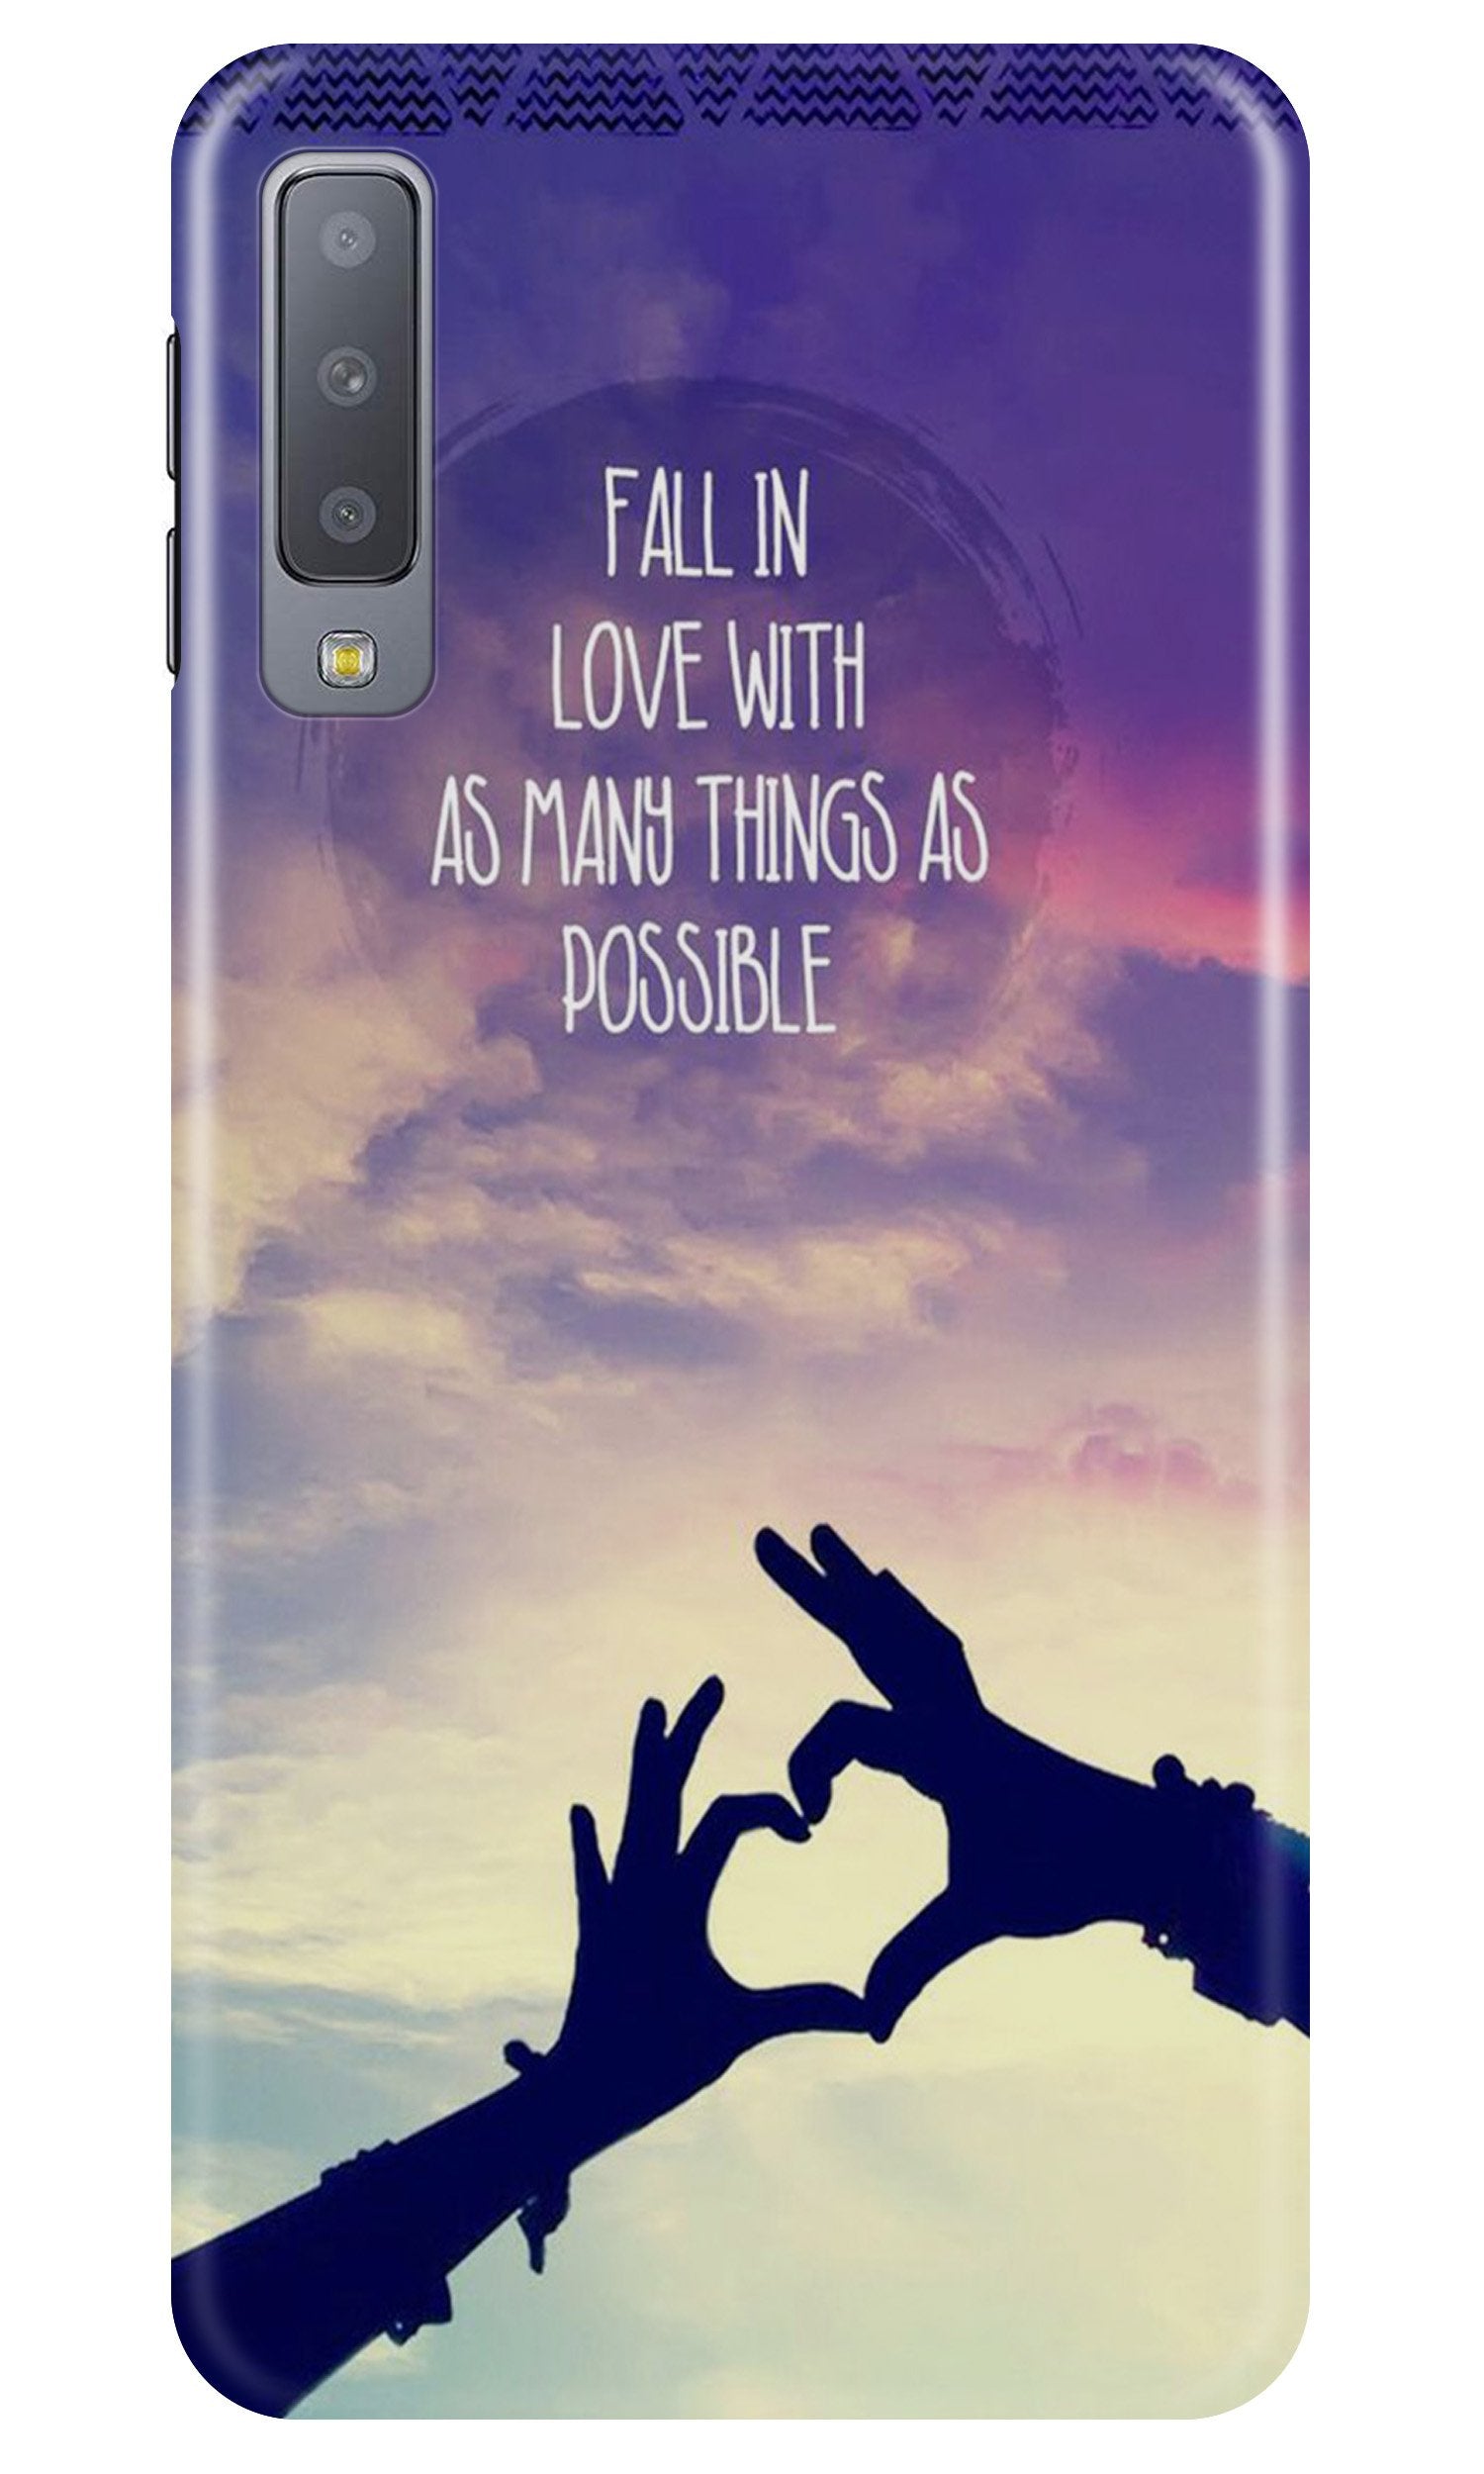 Fall in love Case for Samung Galaxy A70s